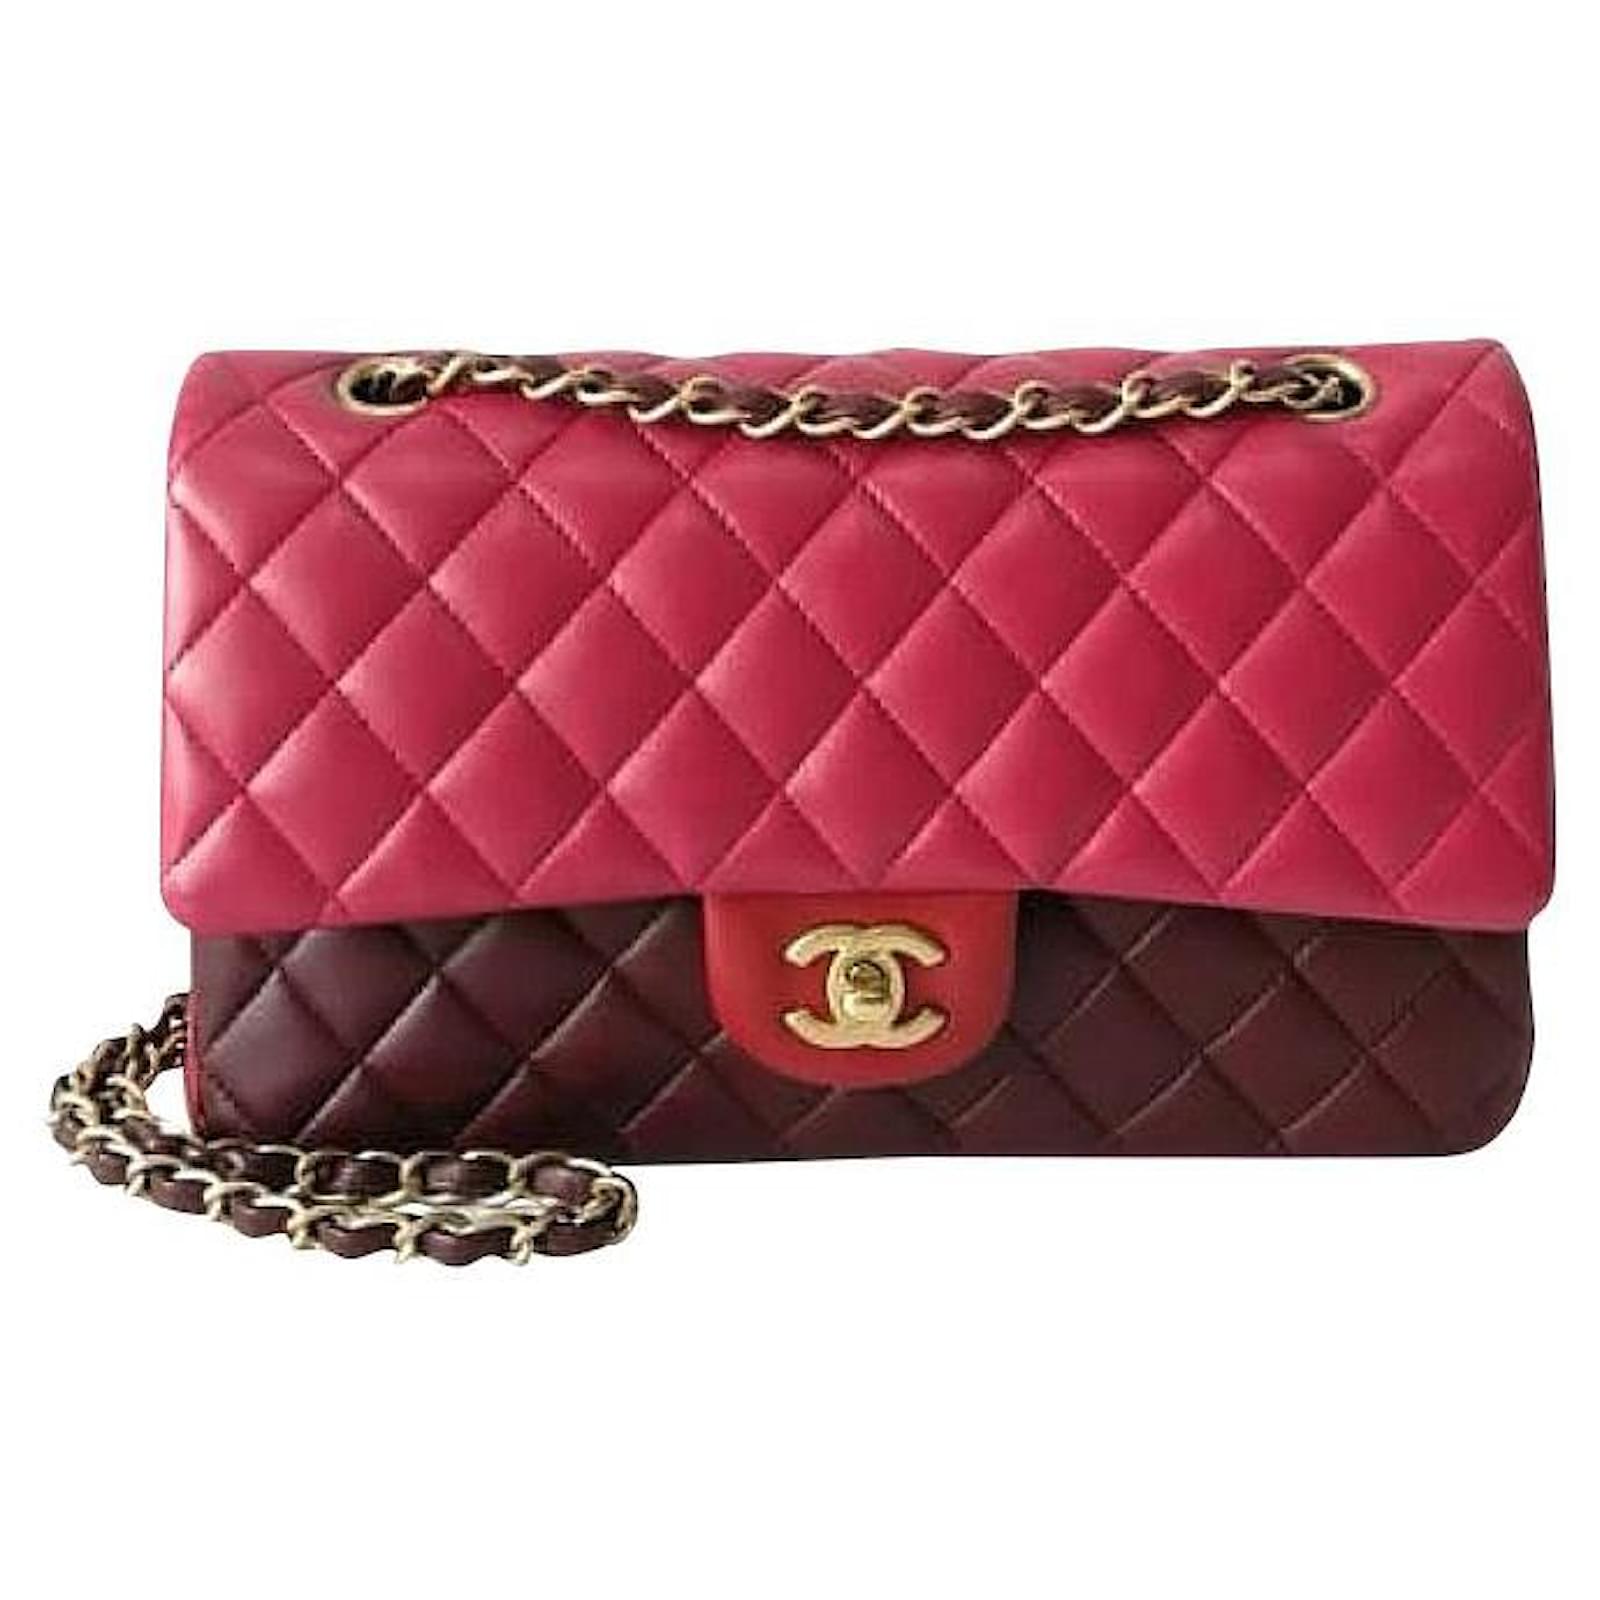 Autre Marque Chanel Timeless Classic Medium Flap bag Red Leather